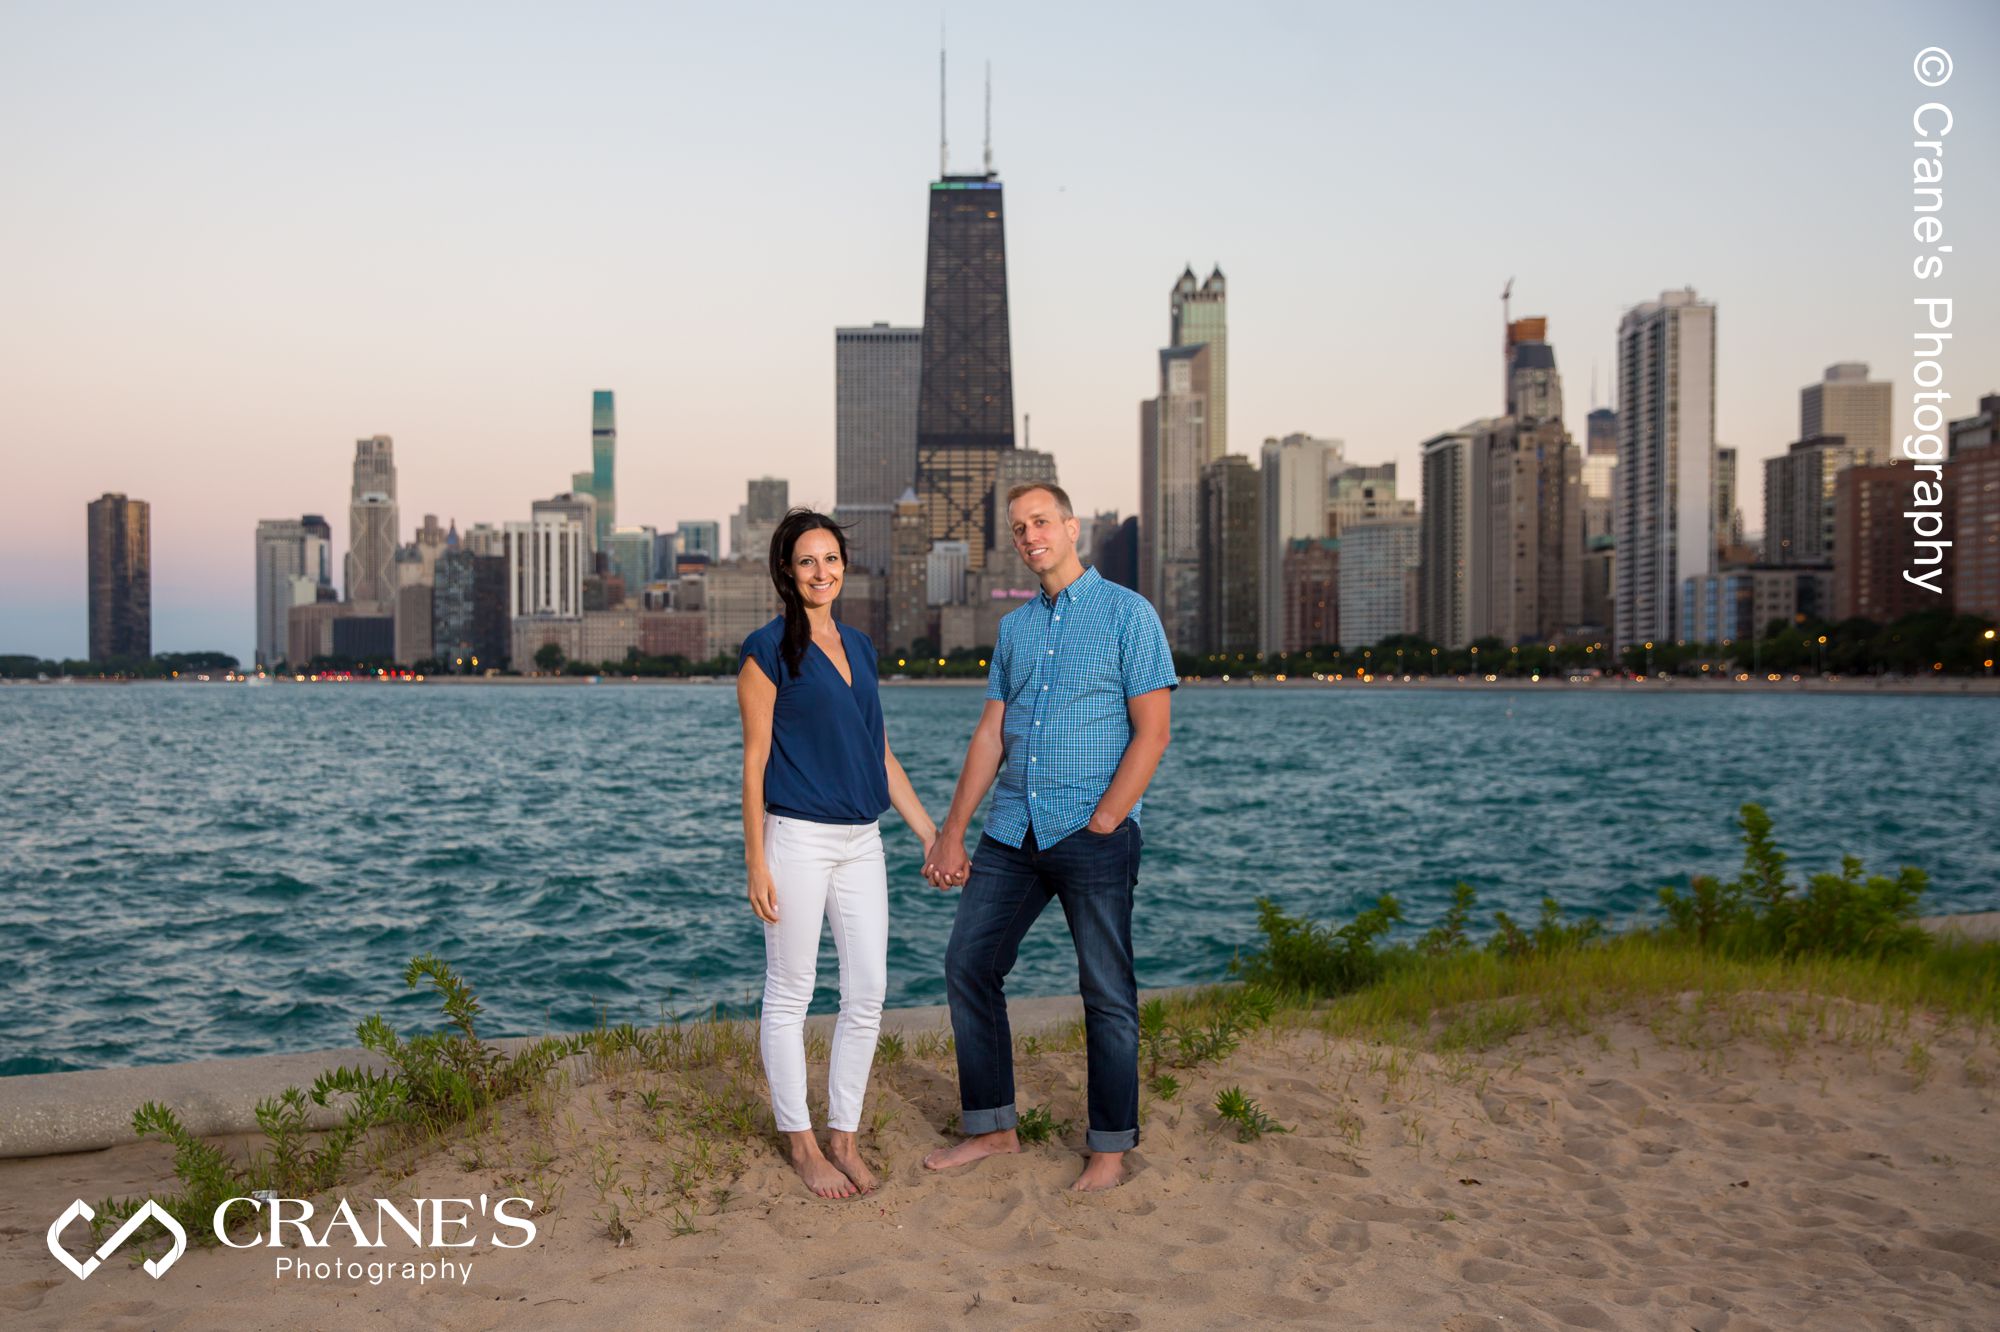 An engaged couple posed for a photo with the skyline of Chicago in the background